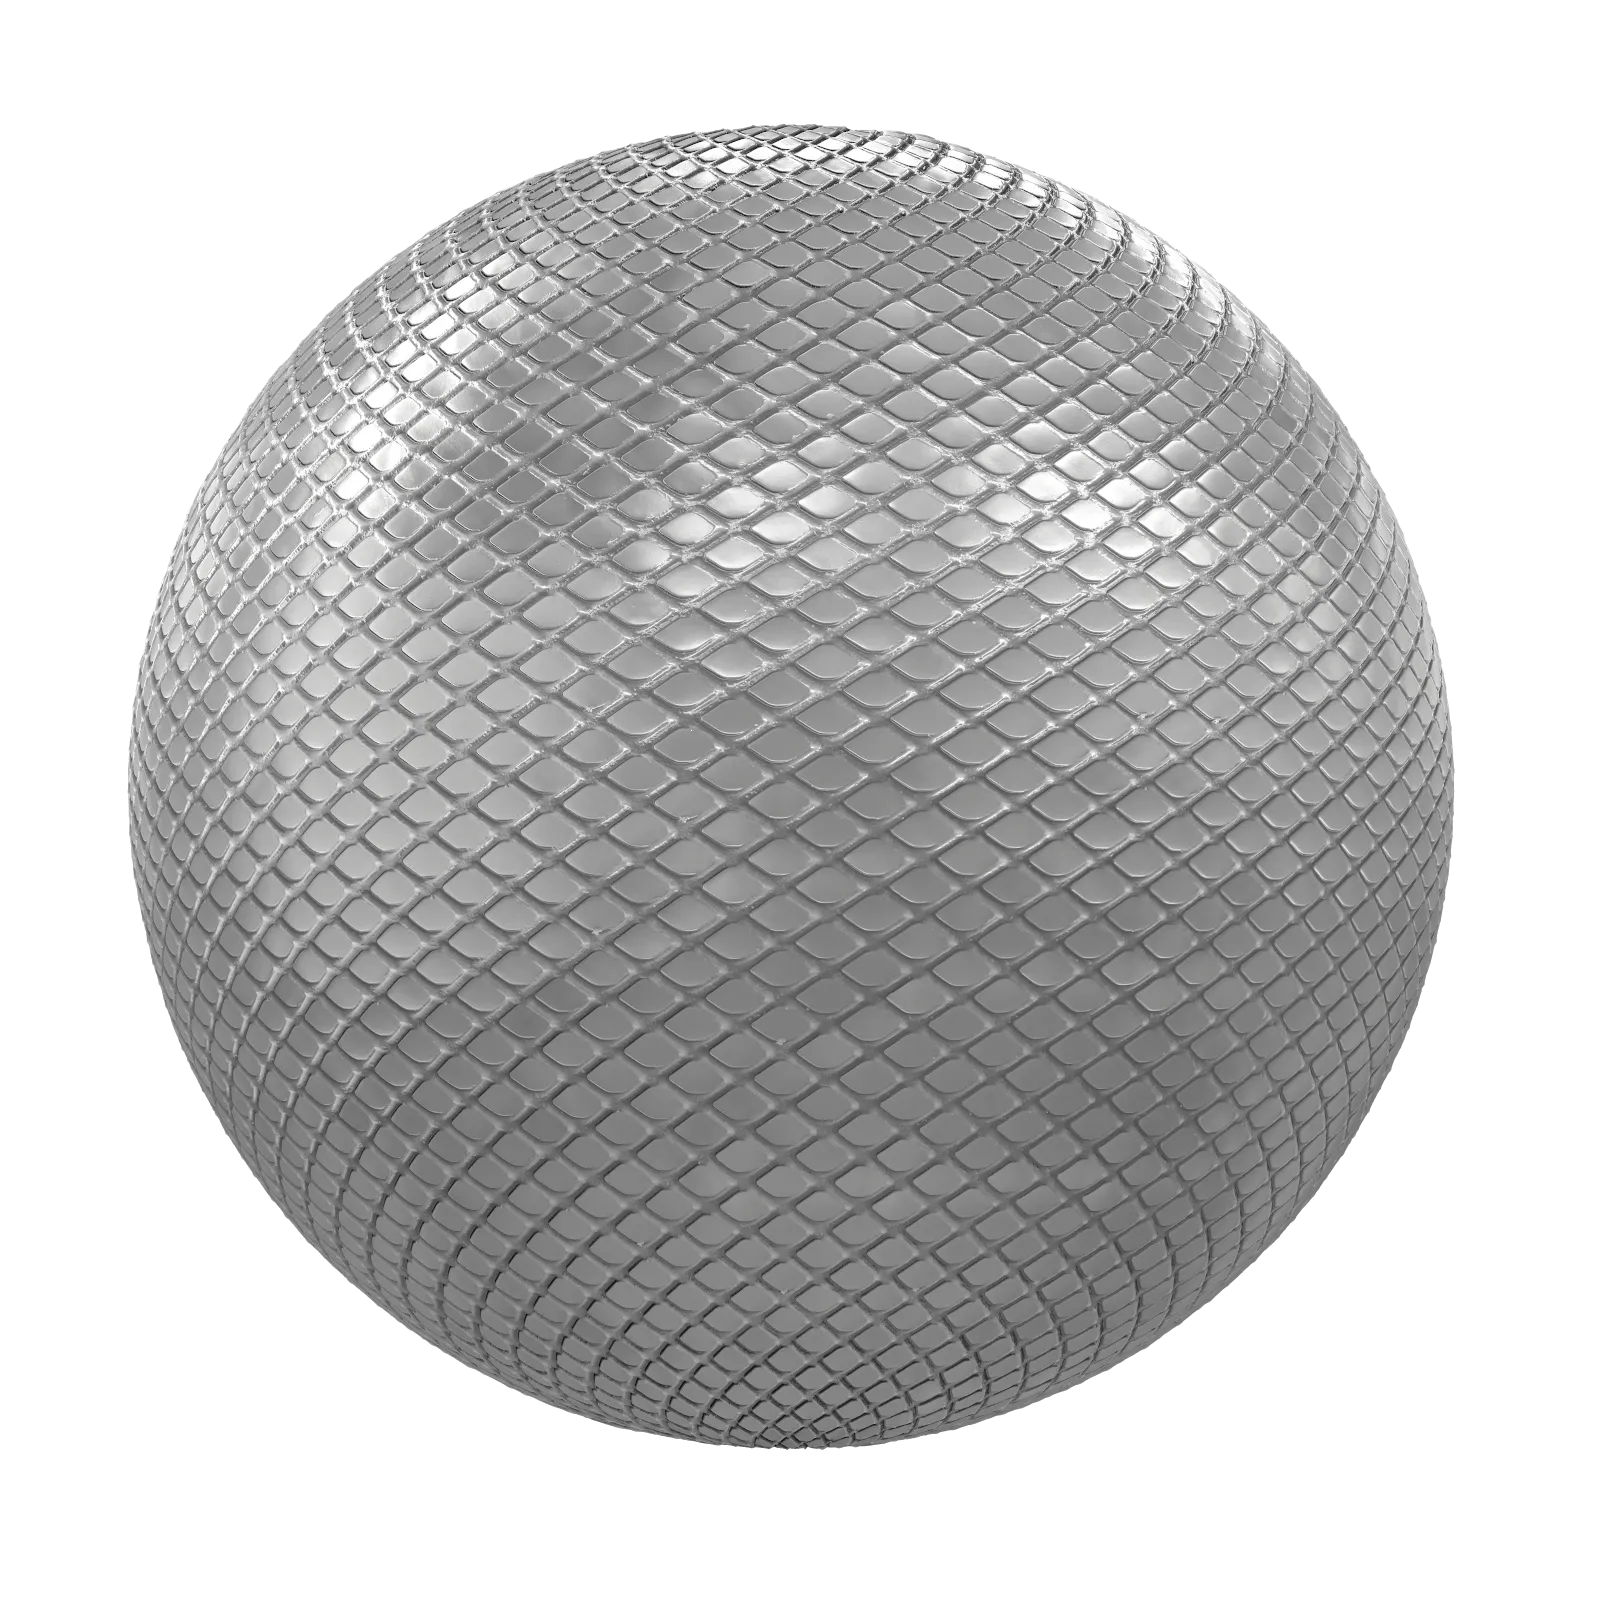 PBR CGAXIS TEXTURES – METALS – Patterned Shiny Metal 01